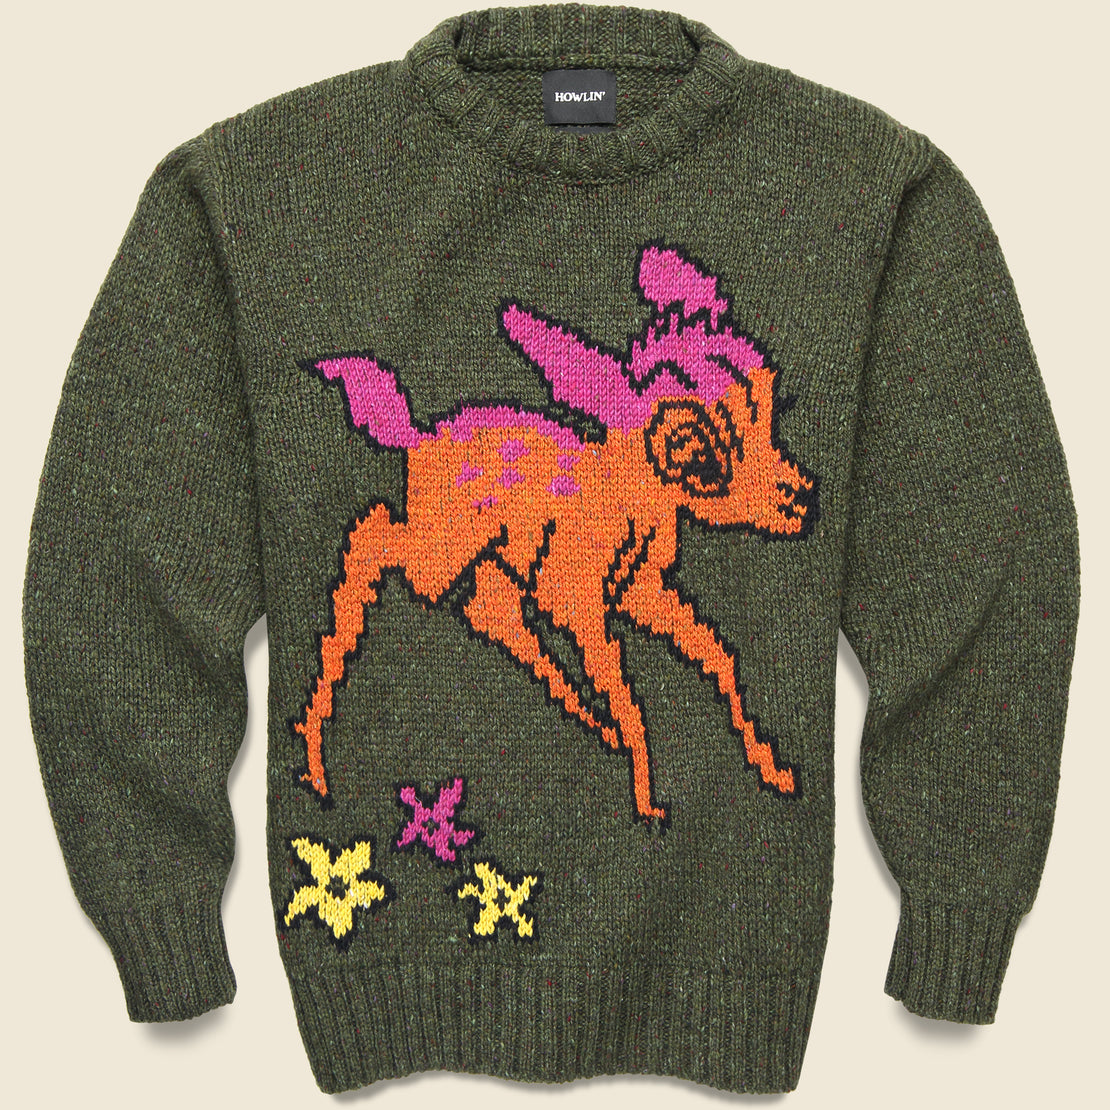 Howlin Cosmic Deer Sweater - In the Forest